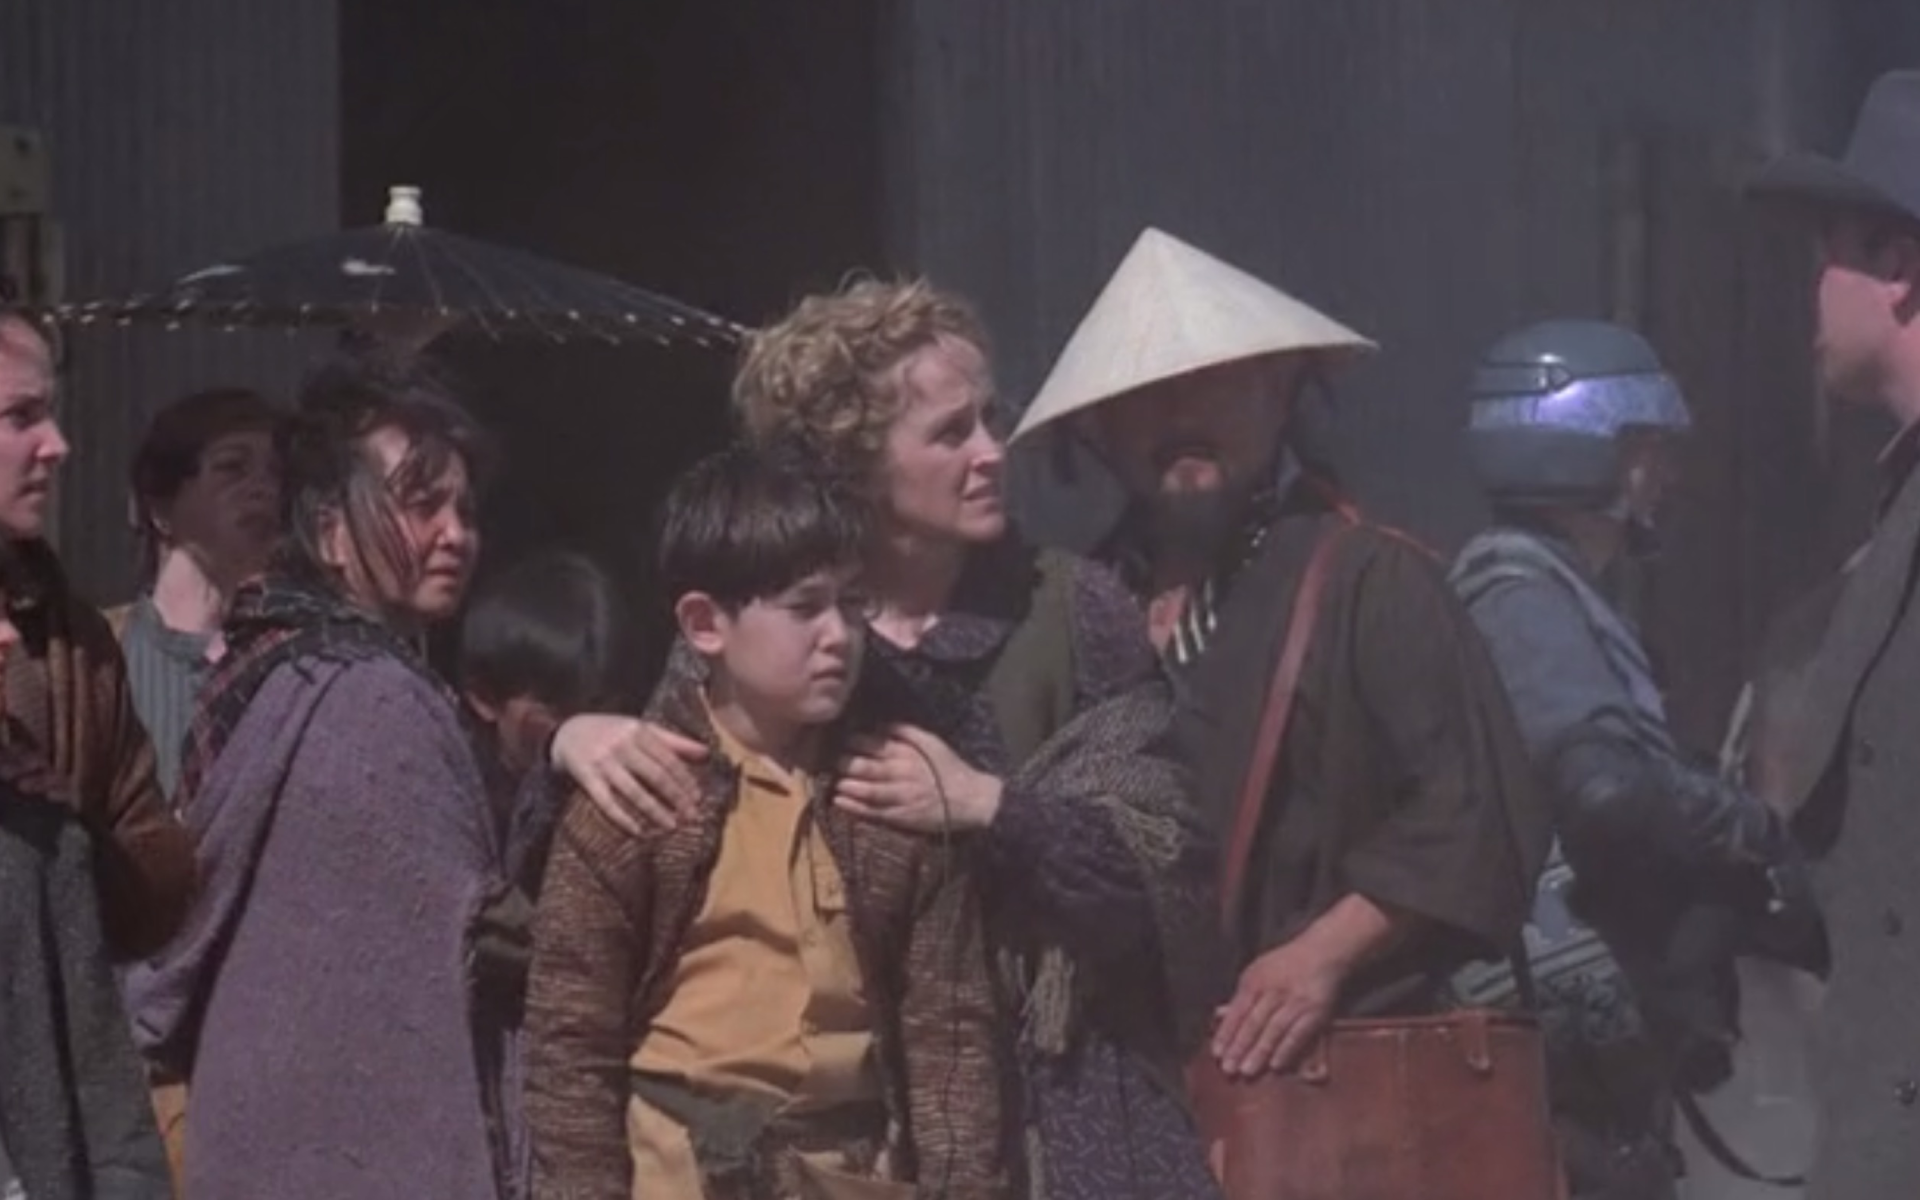 Still from the series "Firefly" shows a group of people standing and looking around. They wear mostly earth-toned clothes. One person wears a conical hat.